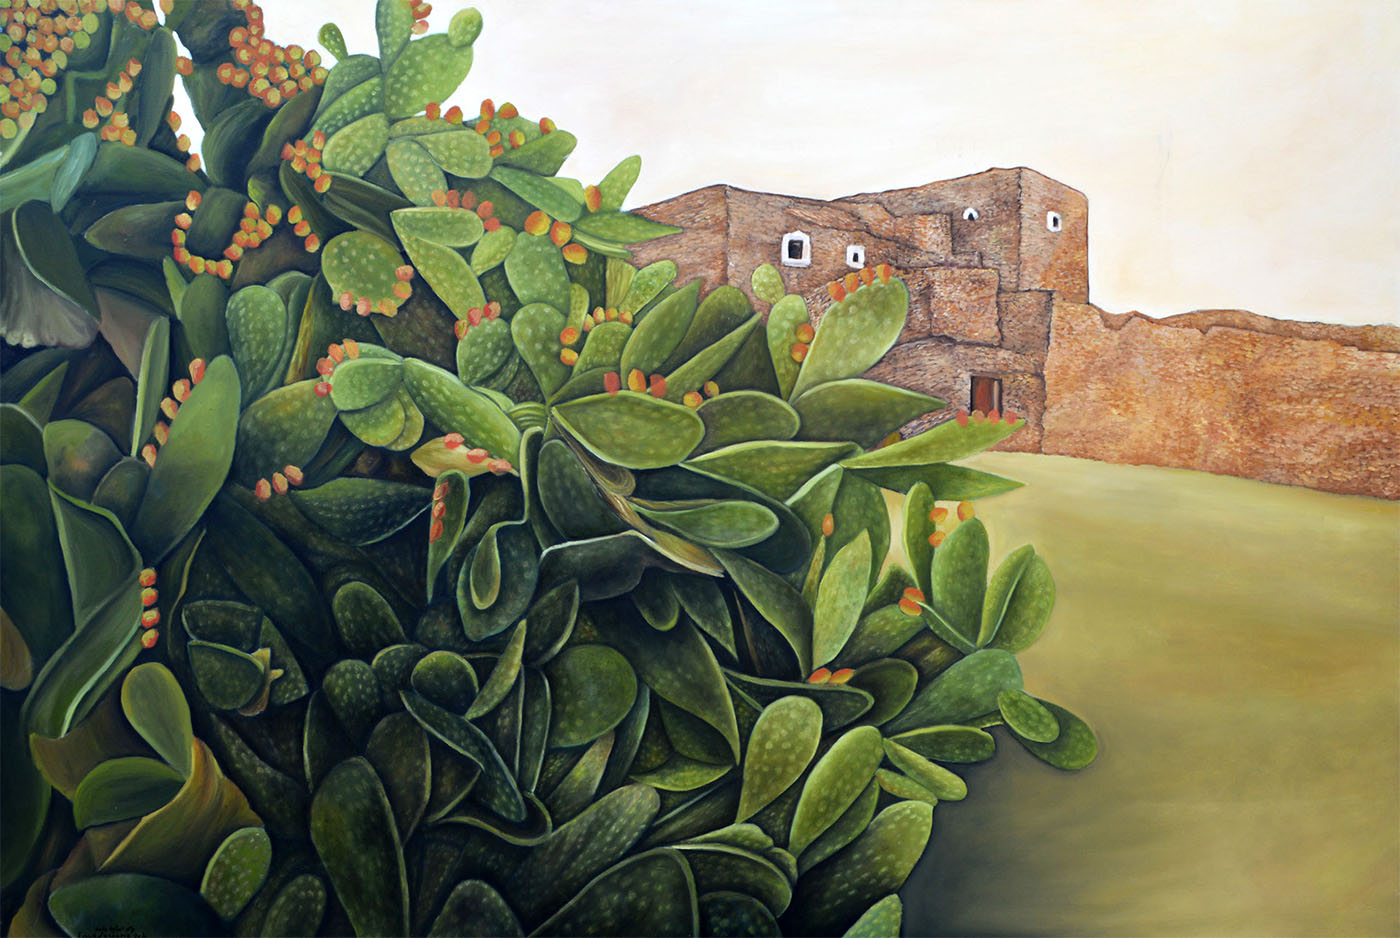 Cactus in the Village - oil on canvas - 120x120cm - 2010